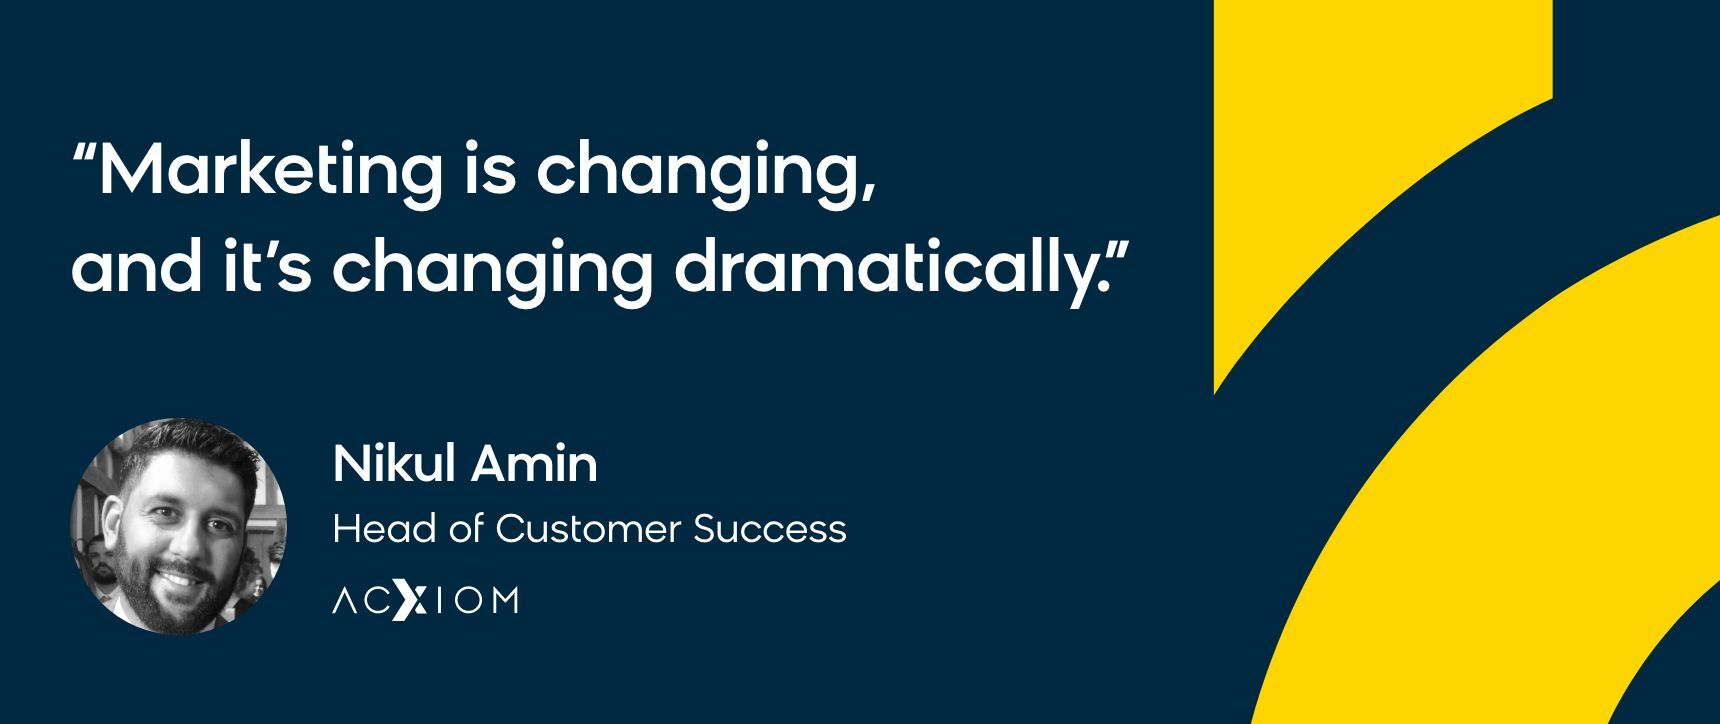 "Marketing is changing, and it's changing dramatically." Quote by Nikul Amin of Acxiom